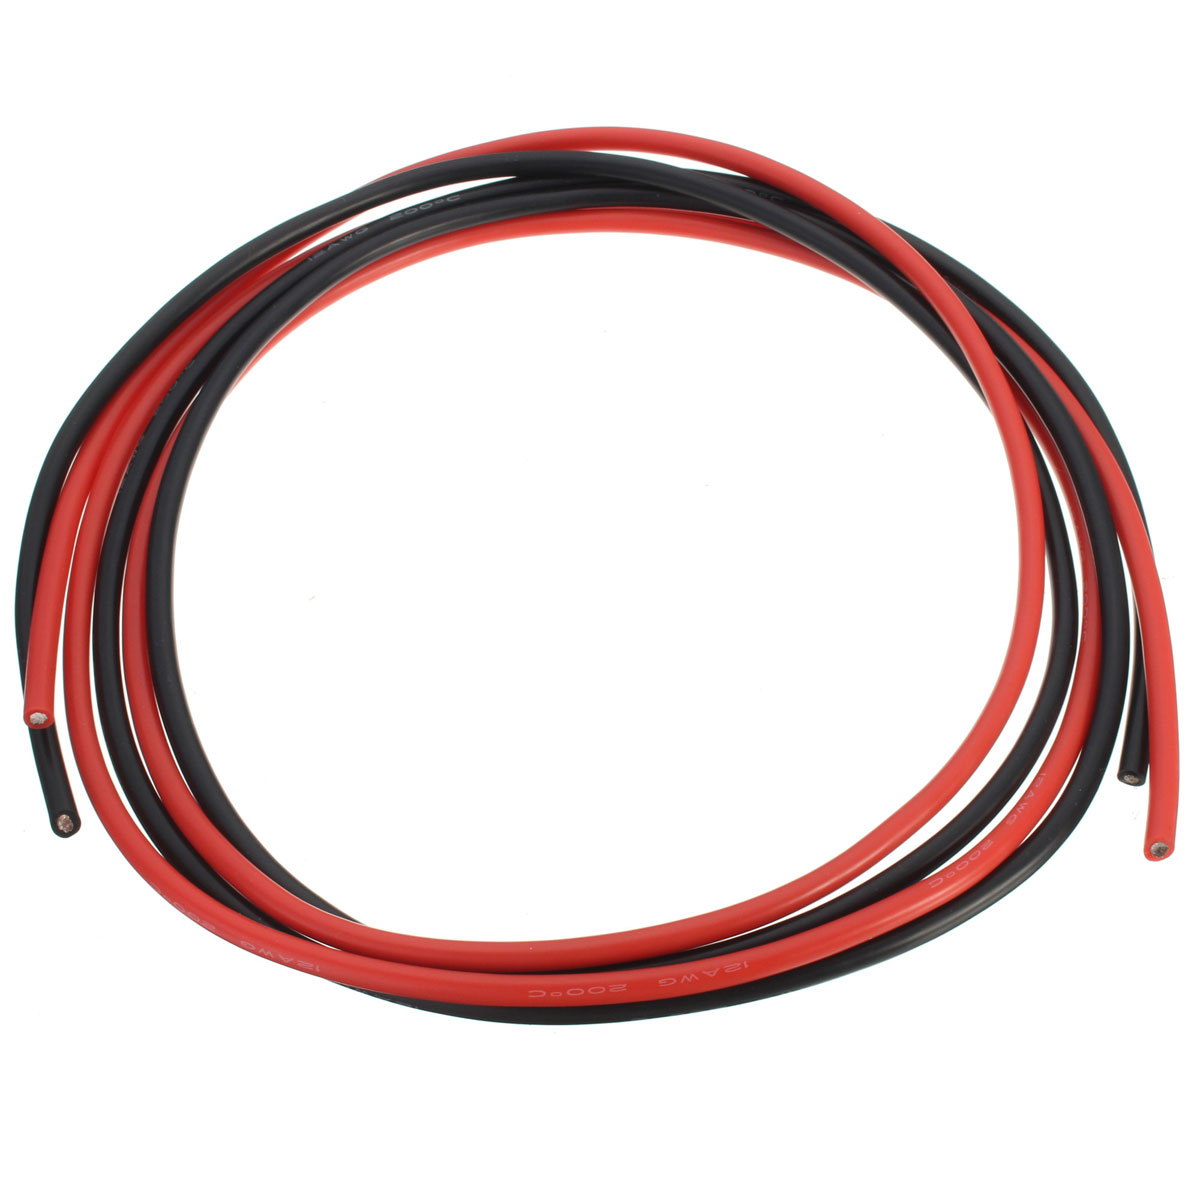 12AWG-3m-Gauge-Silicone-Wire-Flexible-Stranded-BlackRed-Copper-Cable-F-RC-983012-2